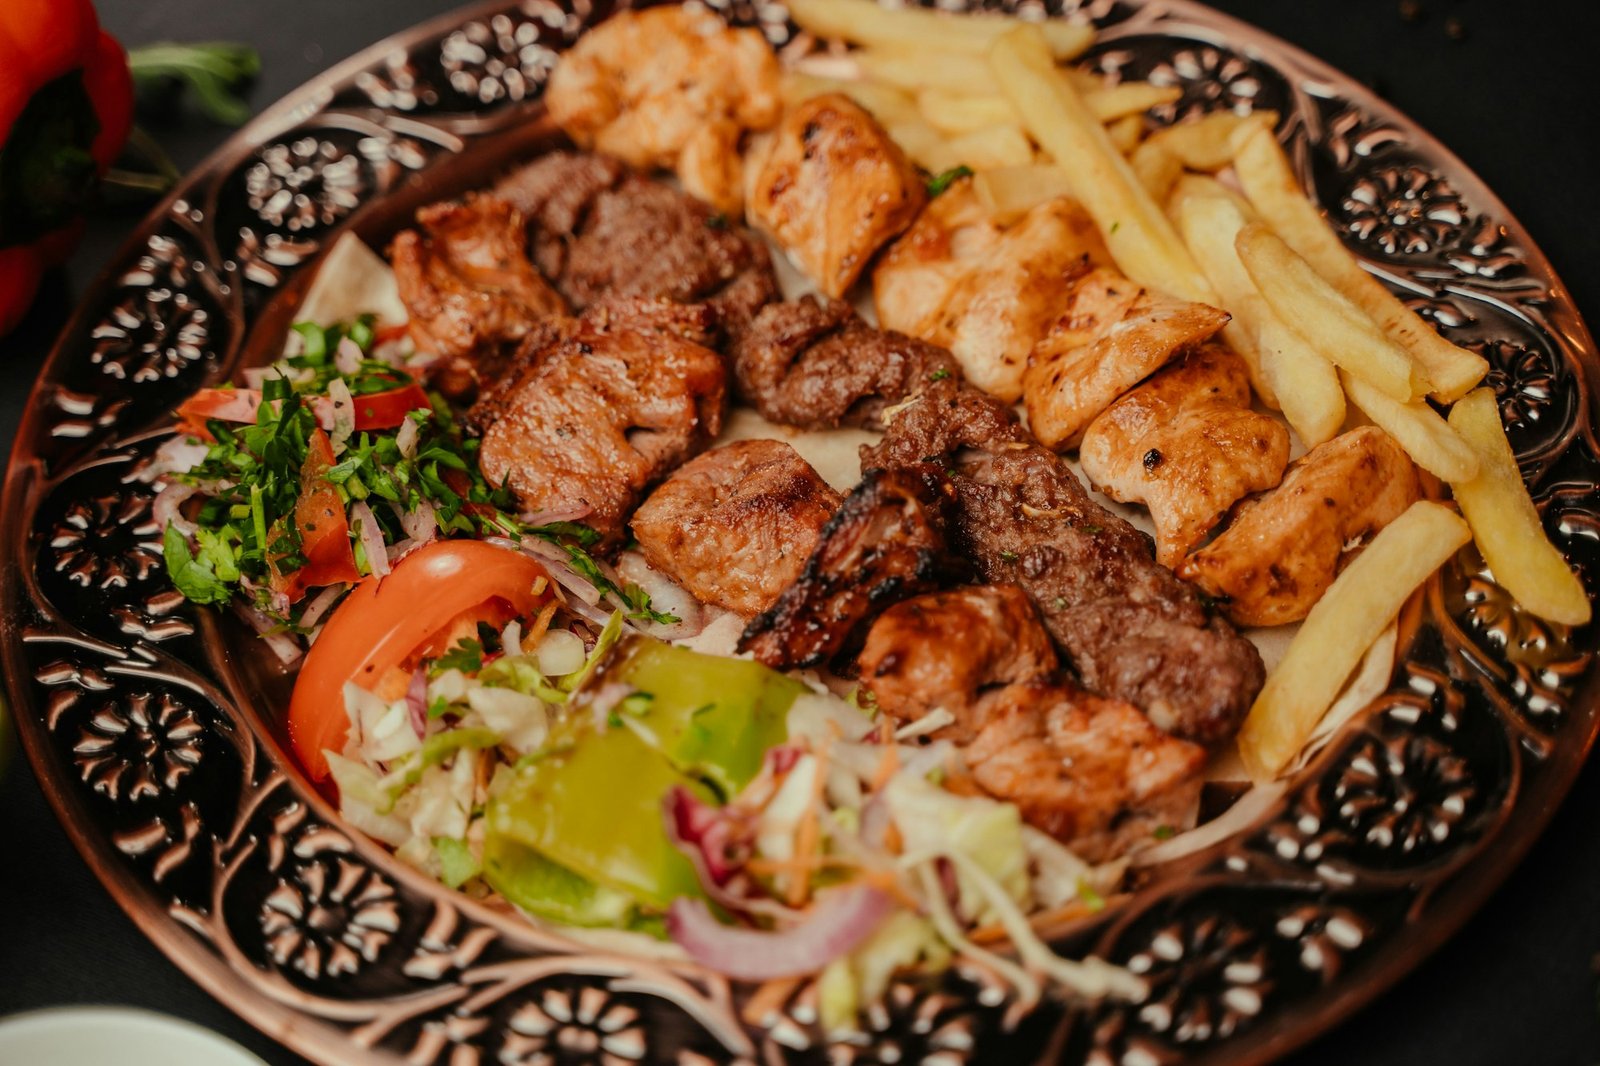 Plate filled with a variety of culinary delights, including fries and freshly made kebab